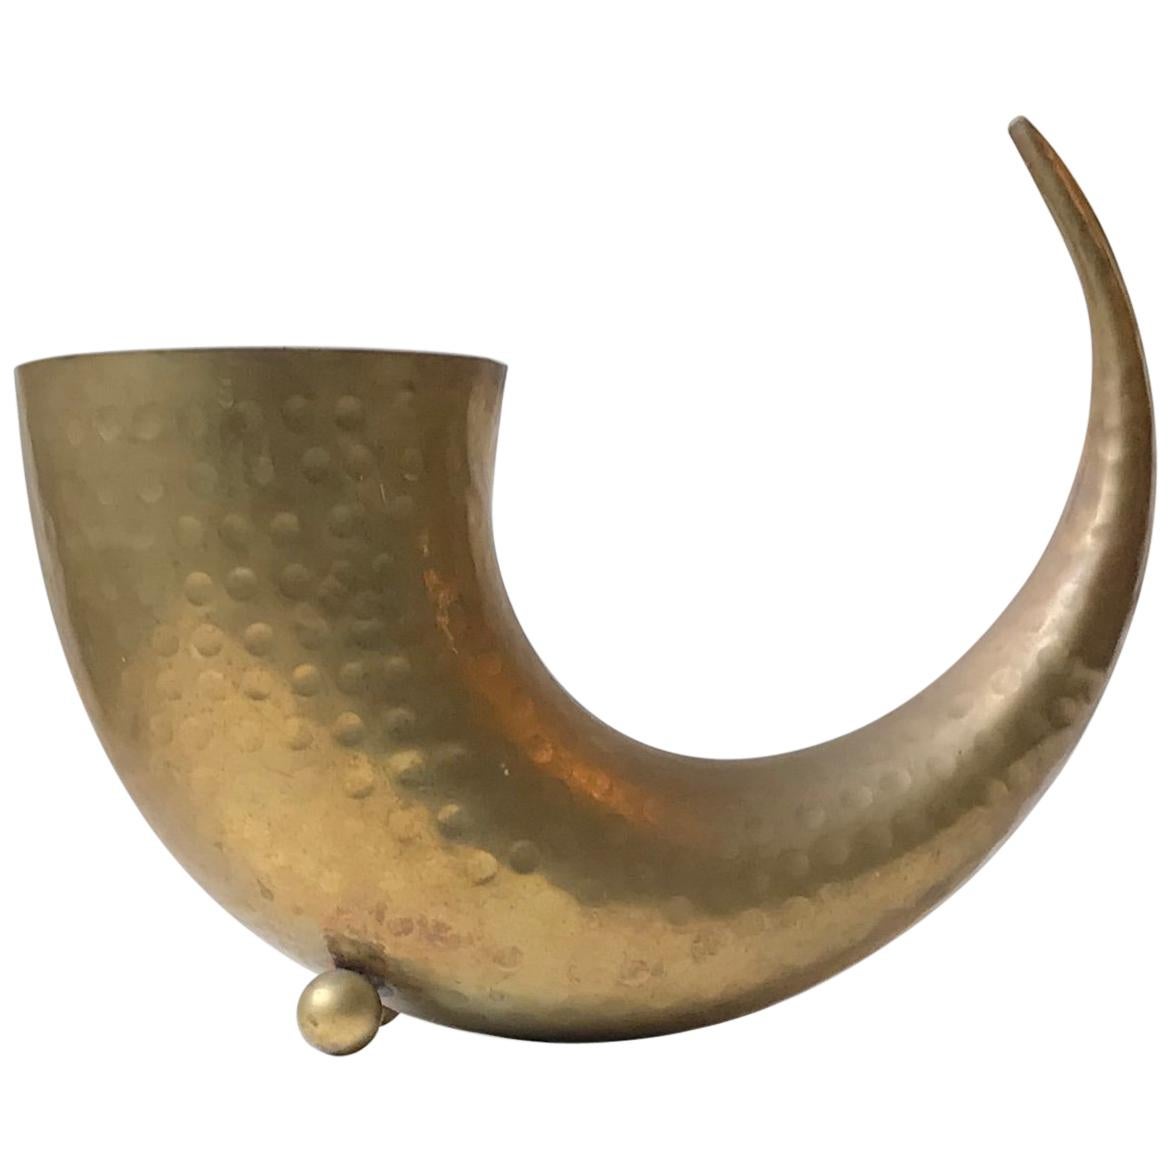 Midcentury Horn Shaped Church Vase in Brass, 1940s For Sale